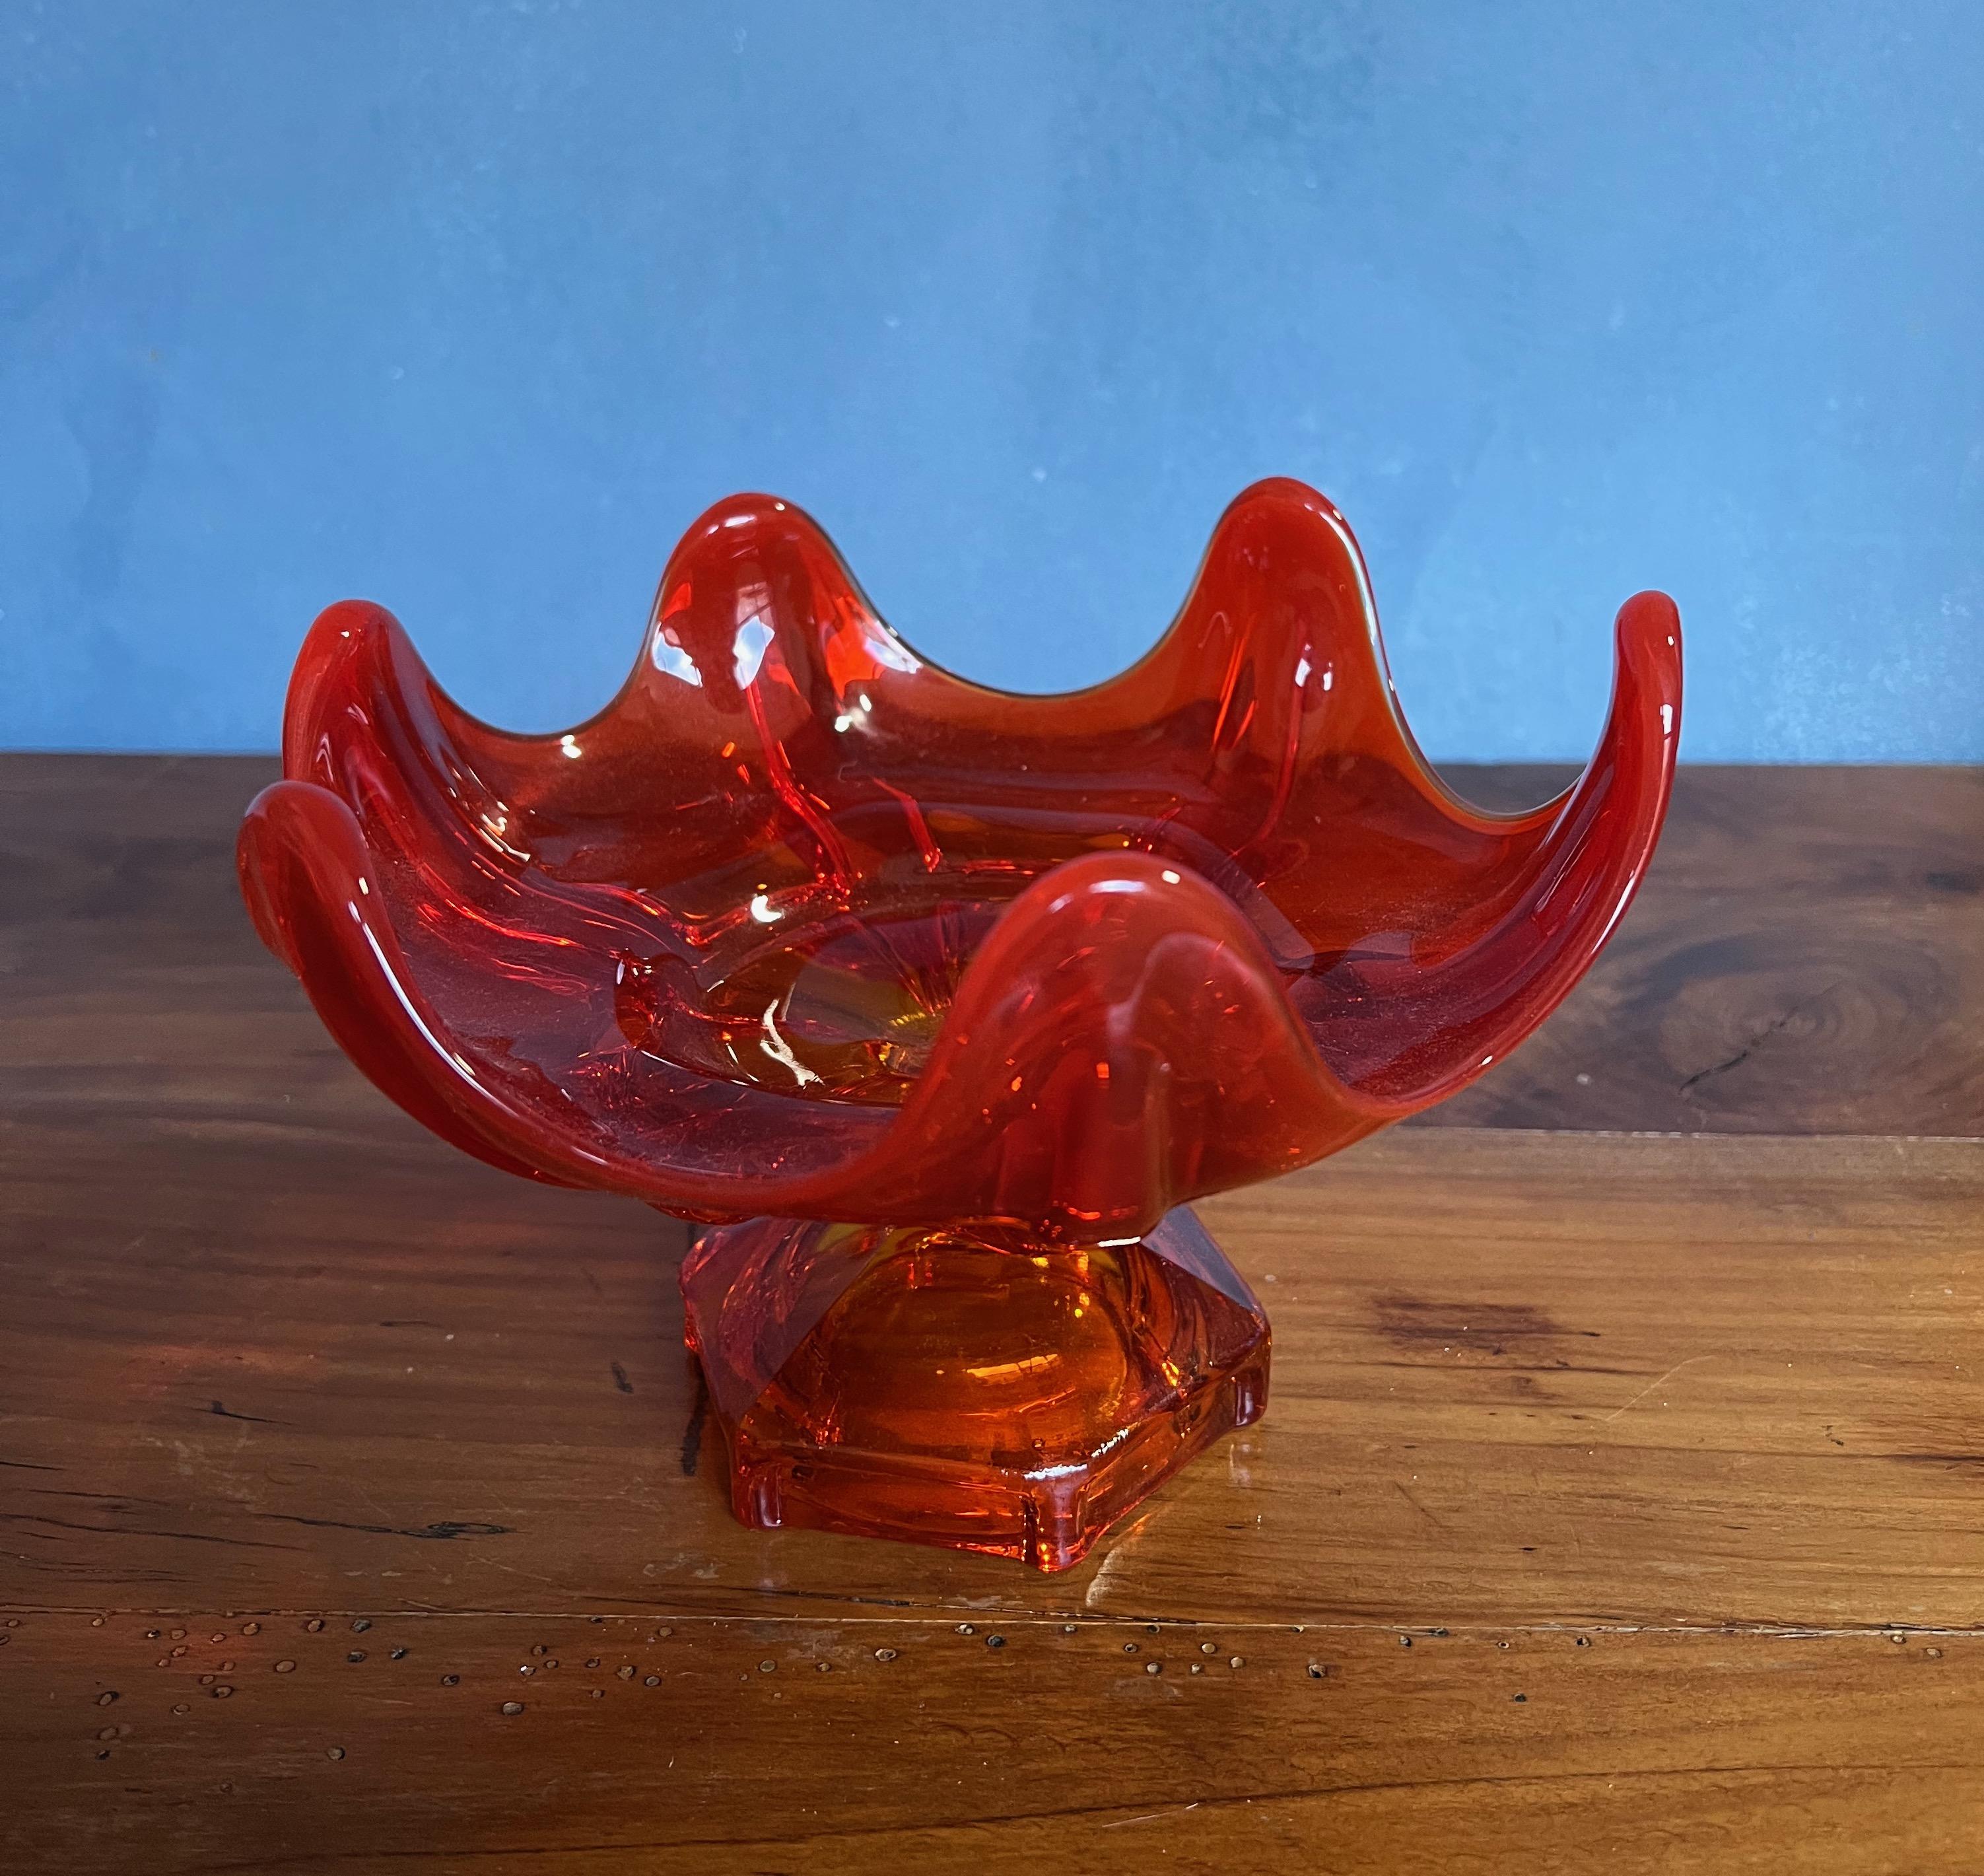 This American glass dish from the 1960s is a beautiful blend of design and craftsmanship. With a scalloped wave design and resting on a footed hexagonal base, it's a striking piece that catches the eye. The ruby/amber color of the glass adds a